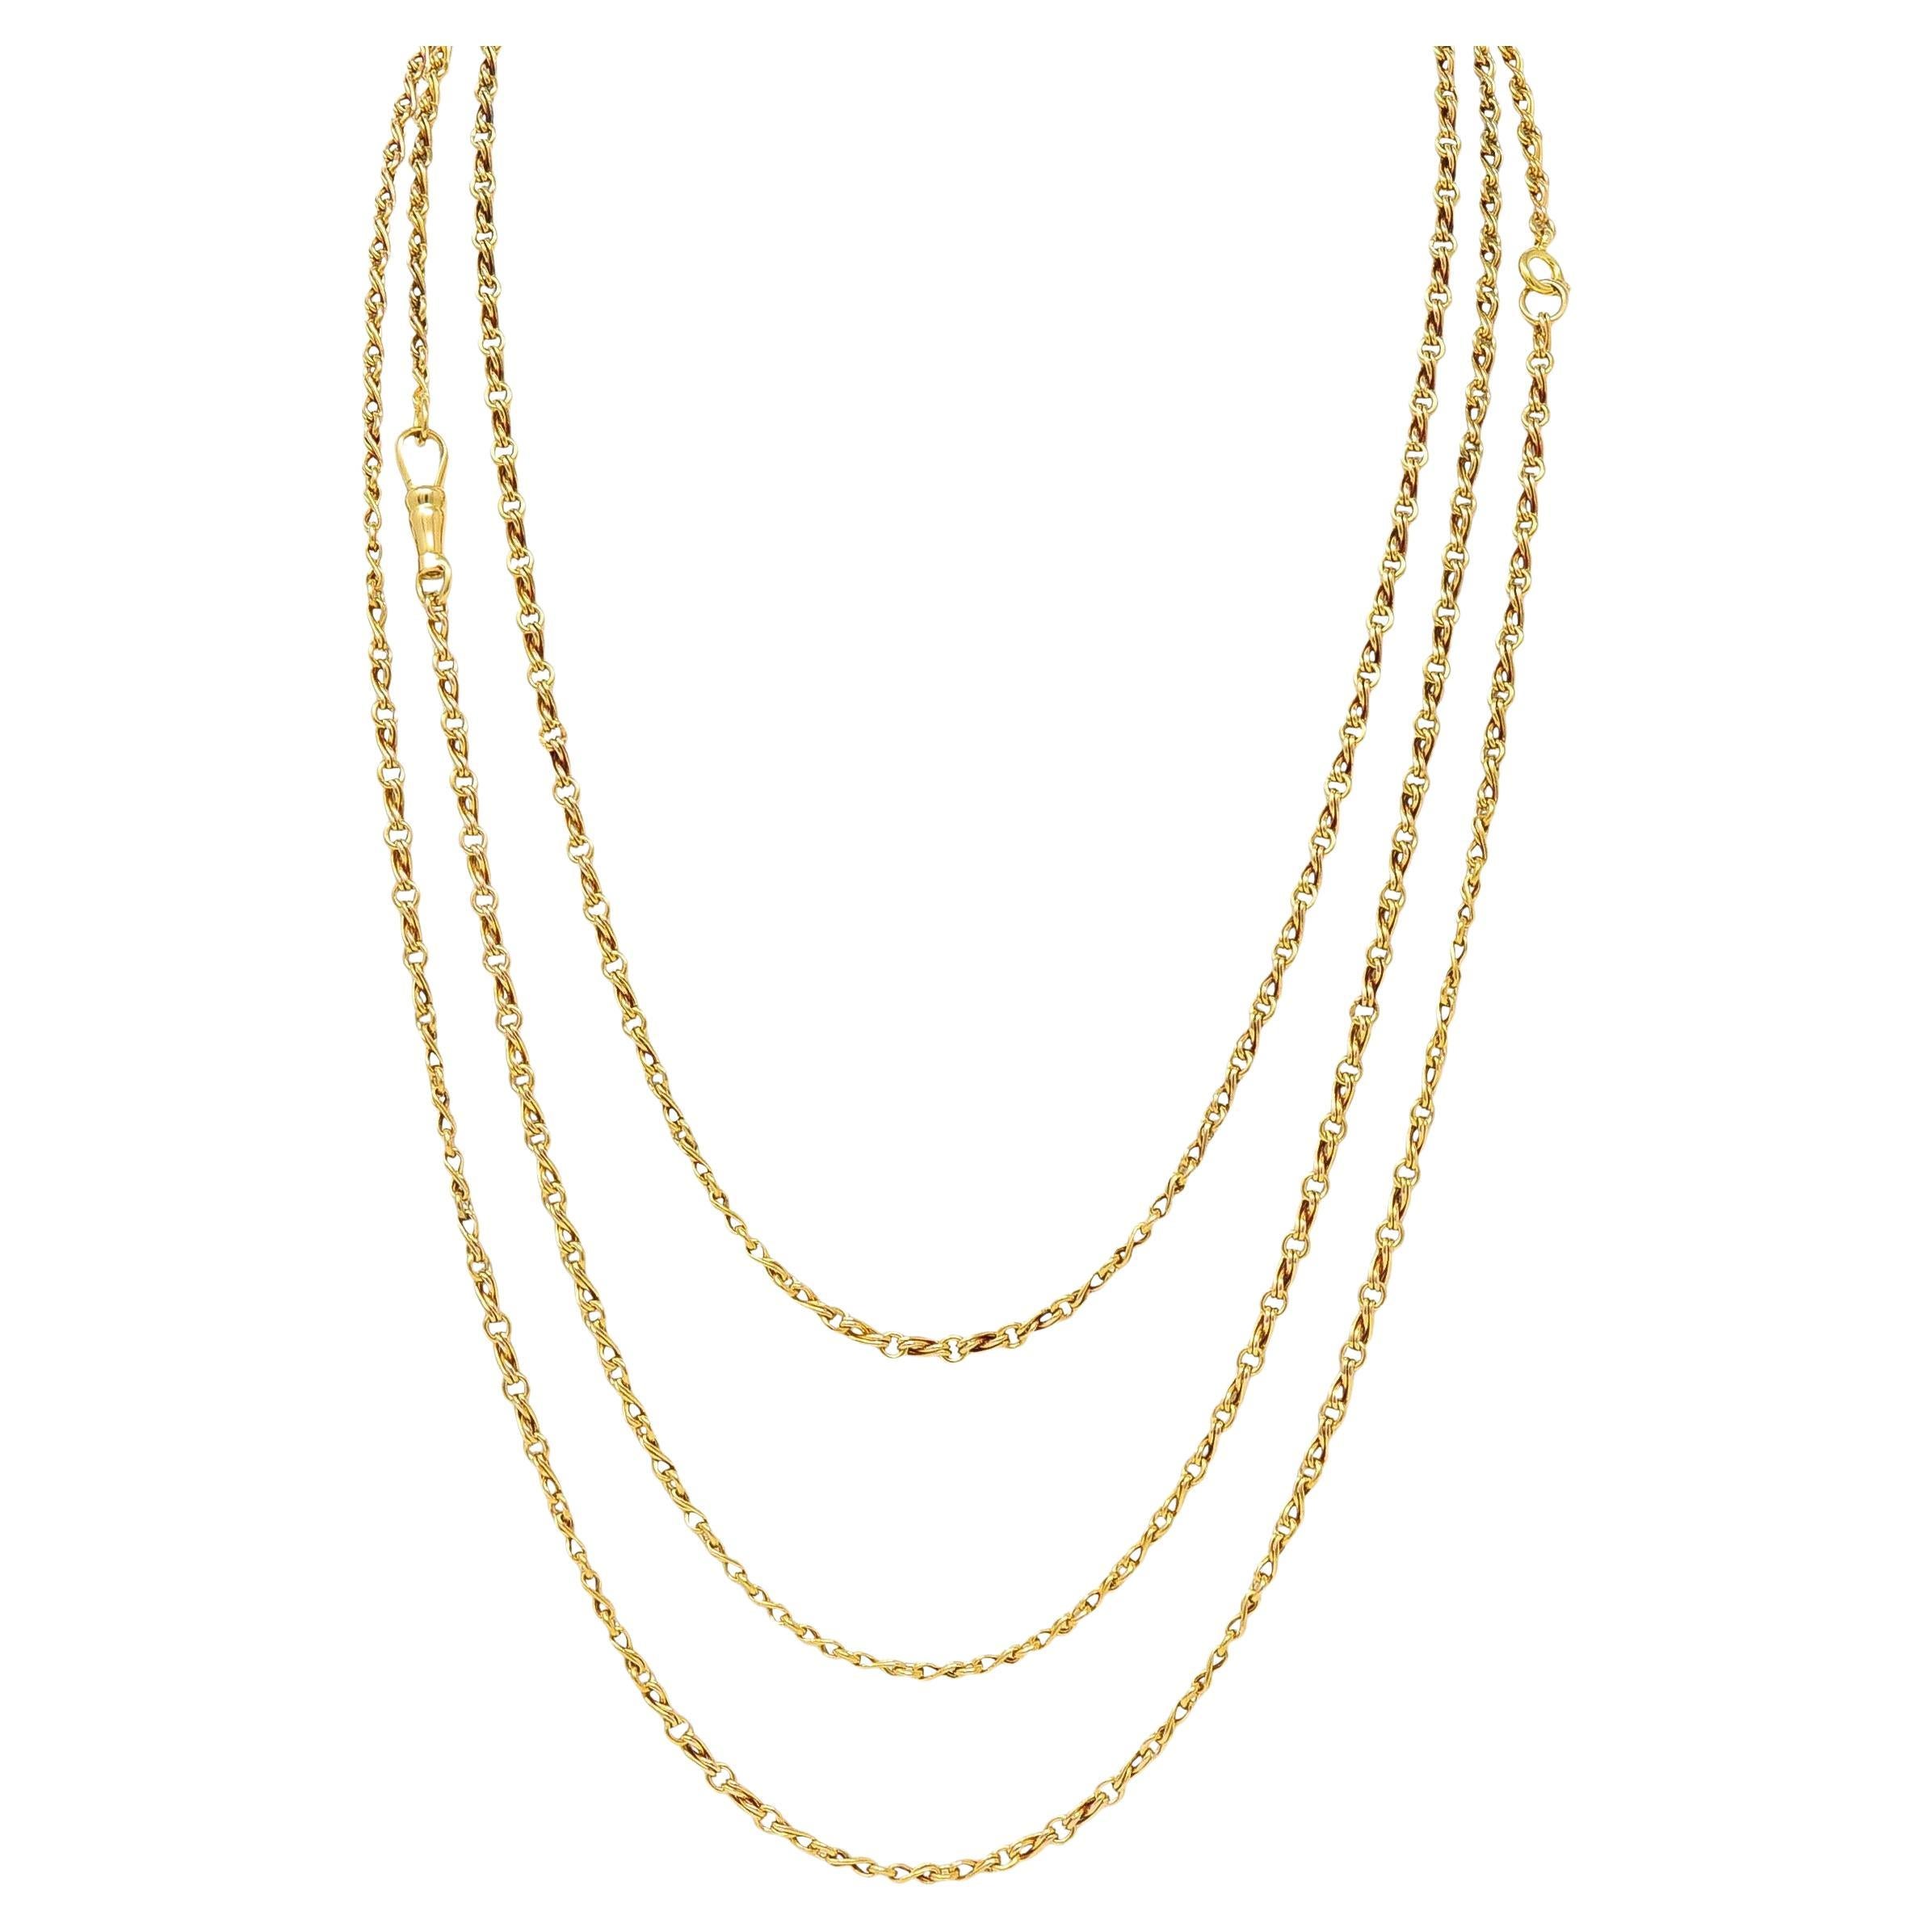 Victorian 18 Karat Yellow Gold Infinity Link 66.5 IN Long Antique Chain Necklace For Sale